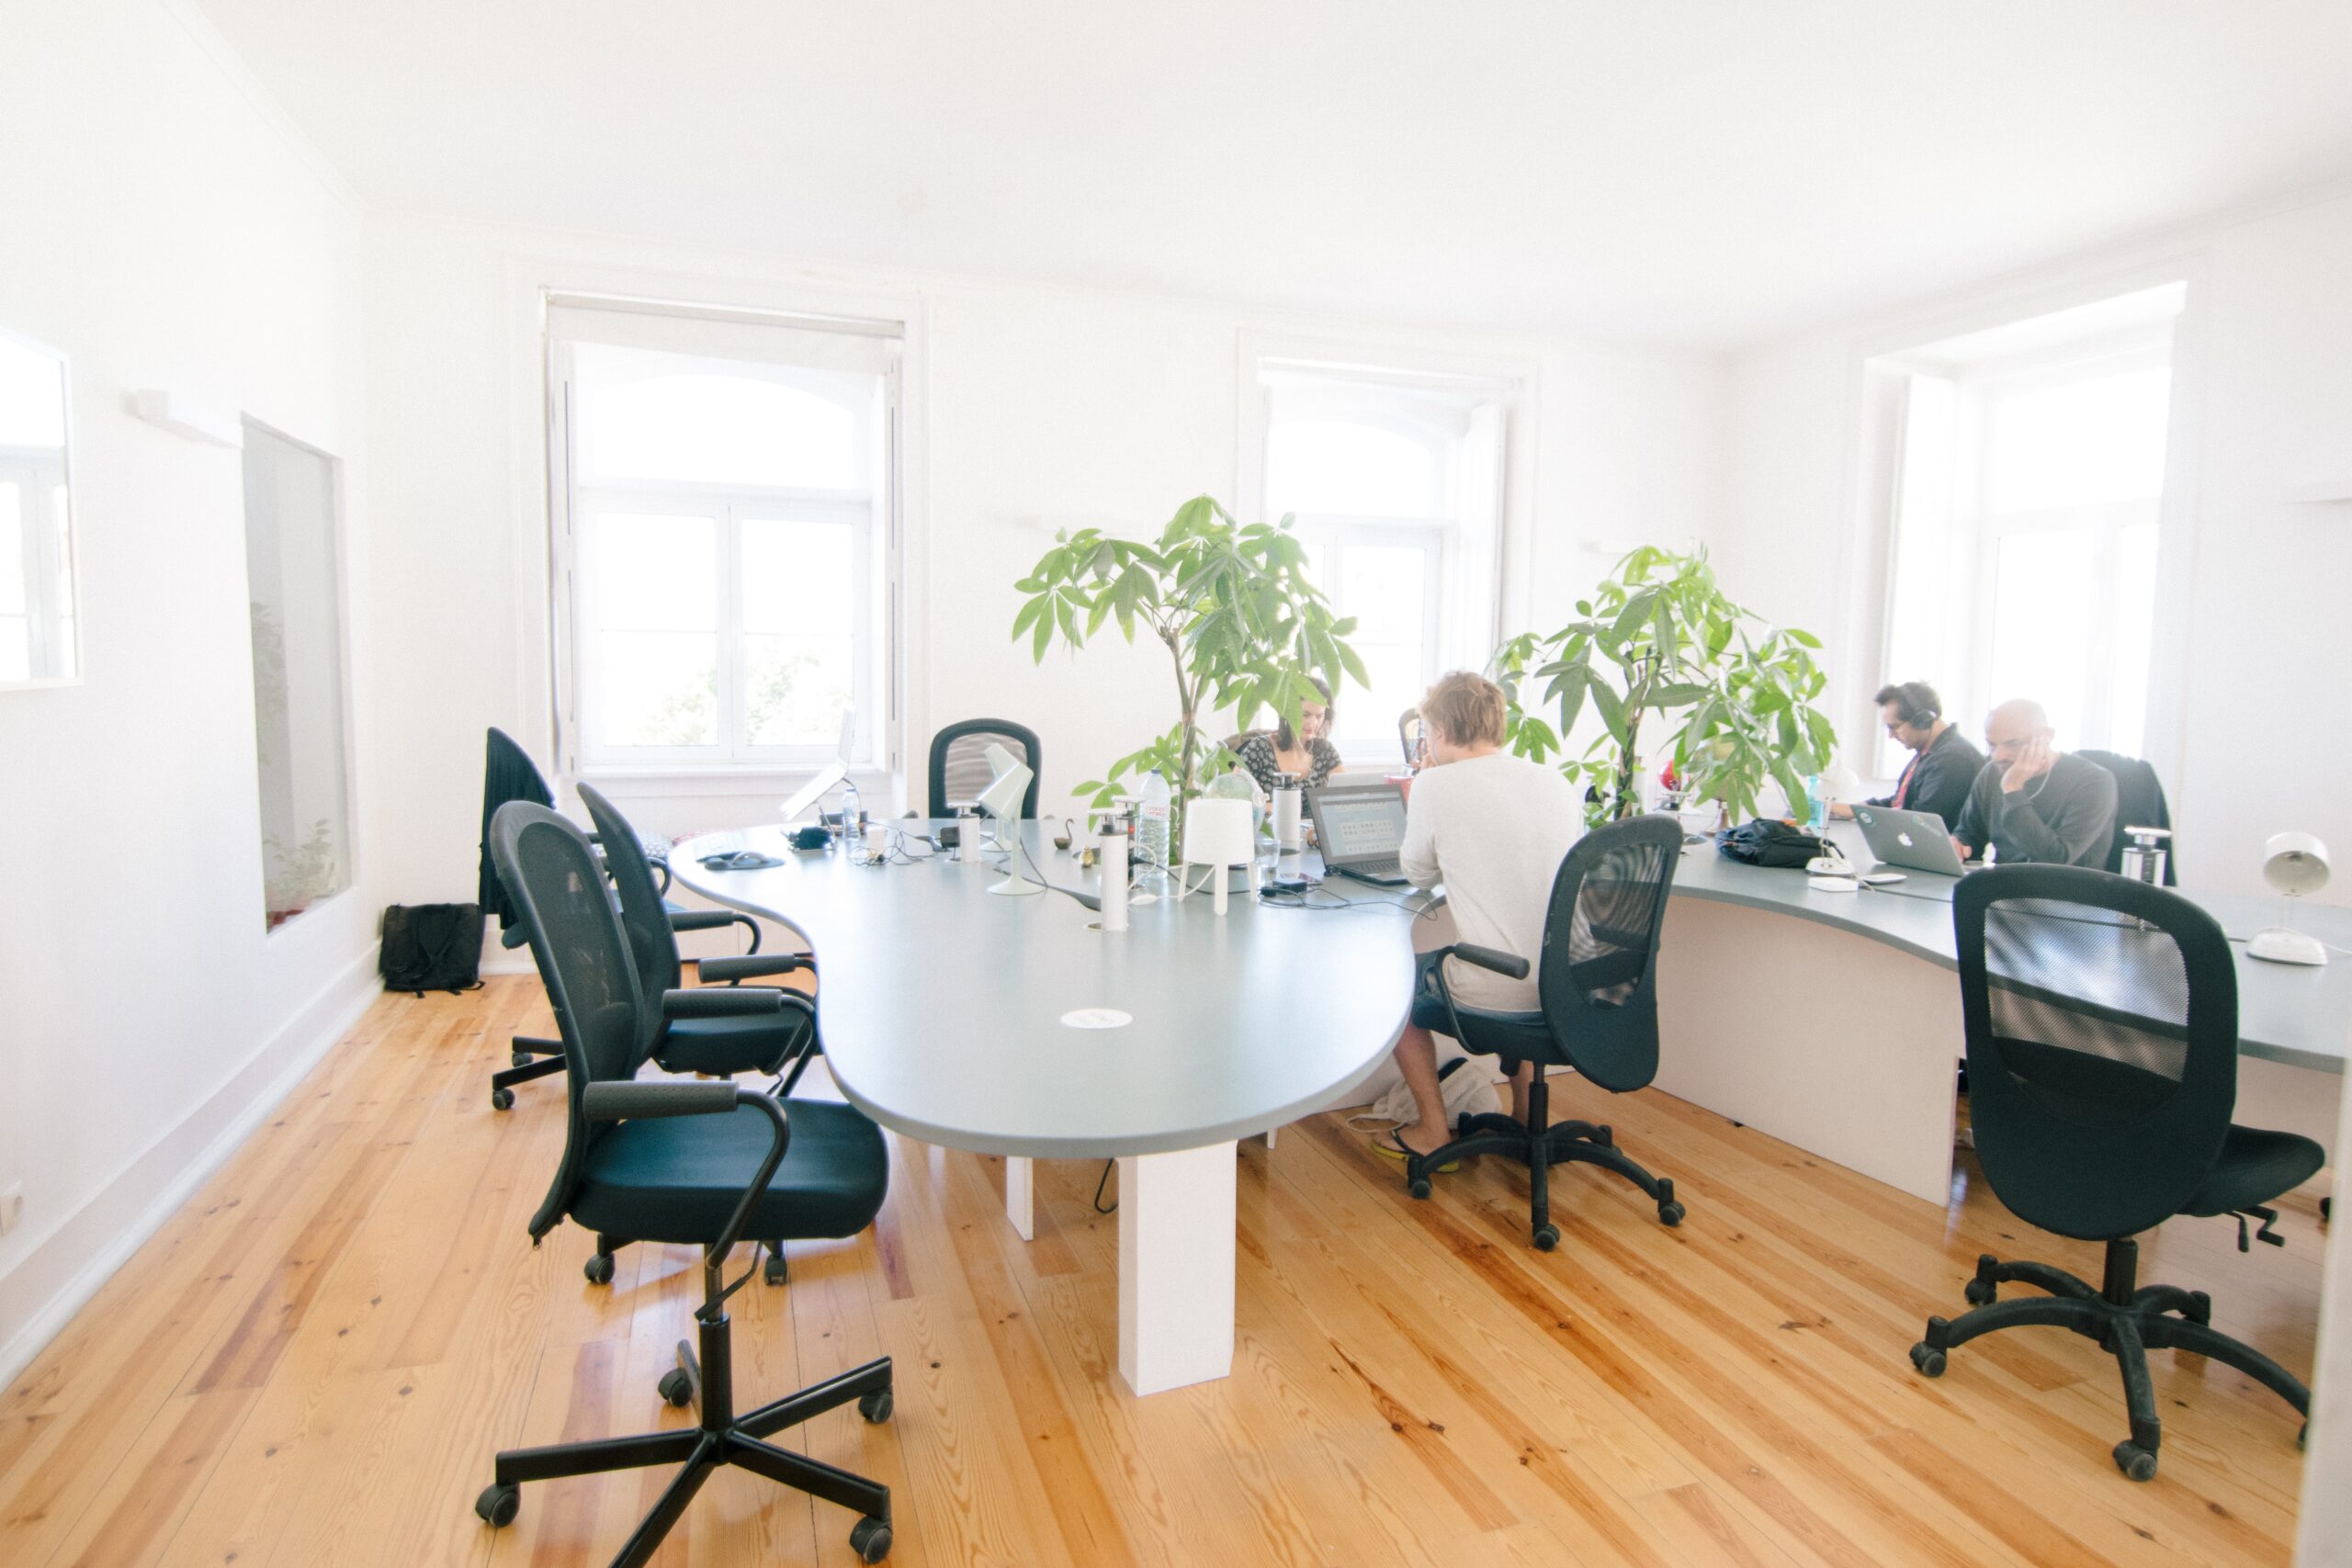 A mainly empty office. Photo by Ben Collins on Unsplash. Thanks Ben.